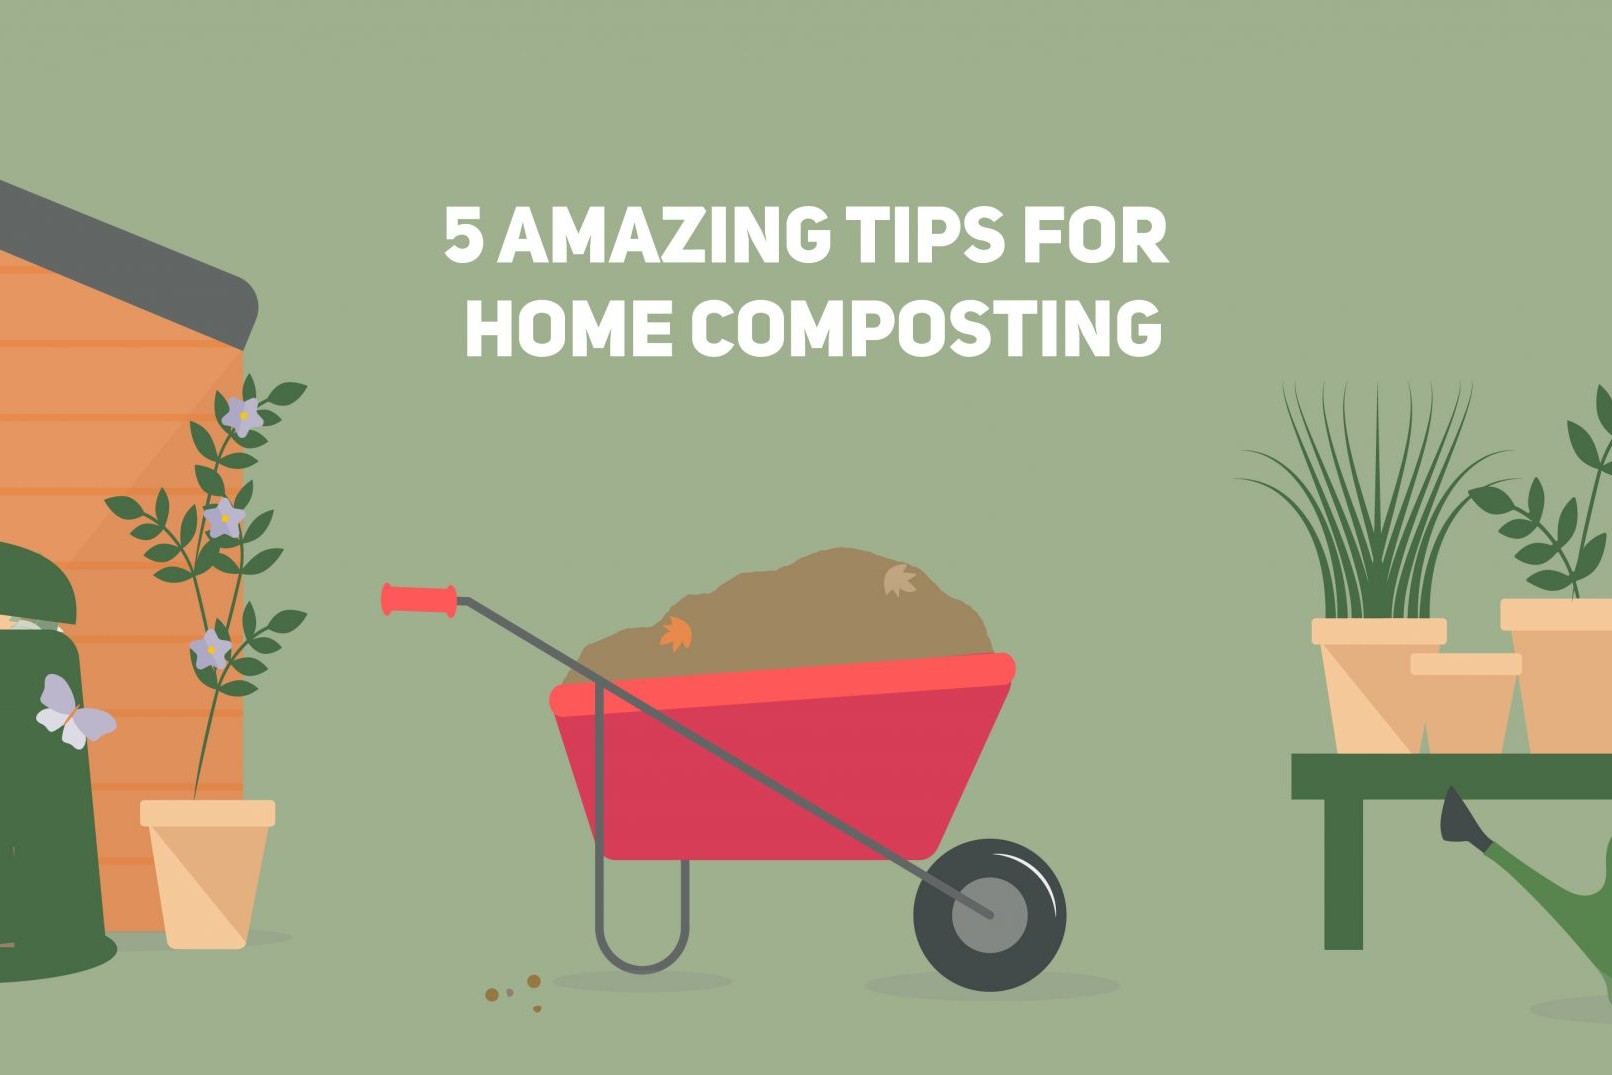 Vegware US's 5 amazing tips for home composting